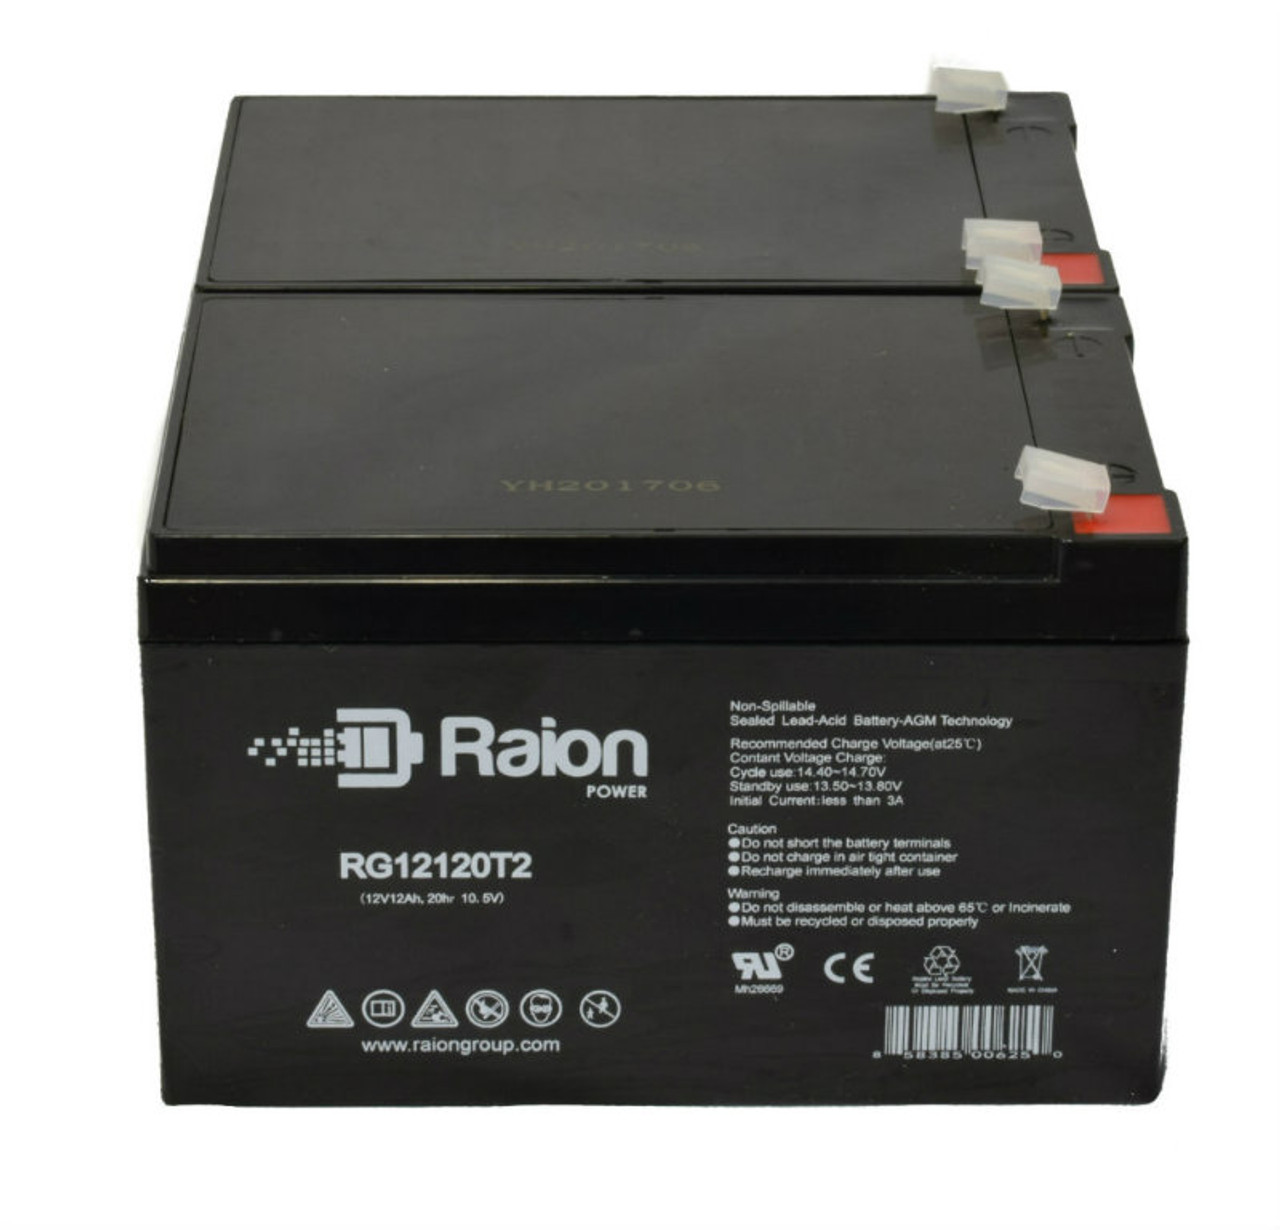 Raion Power RG12120T2 Replacement Battery Set for Drive Medical Design Hawk Mobility Scooter - 2 Pack